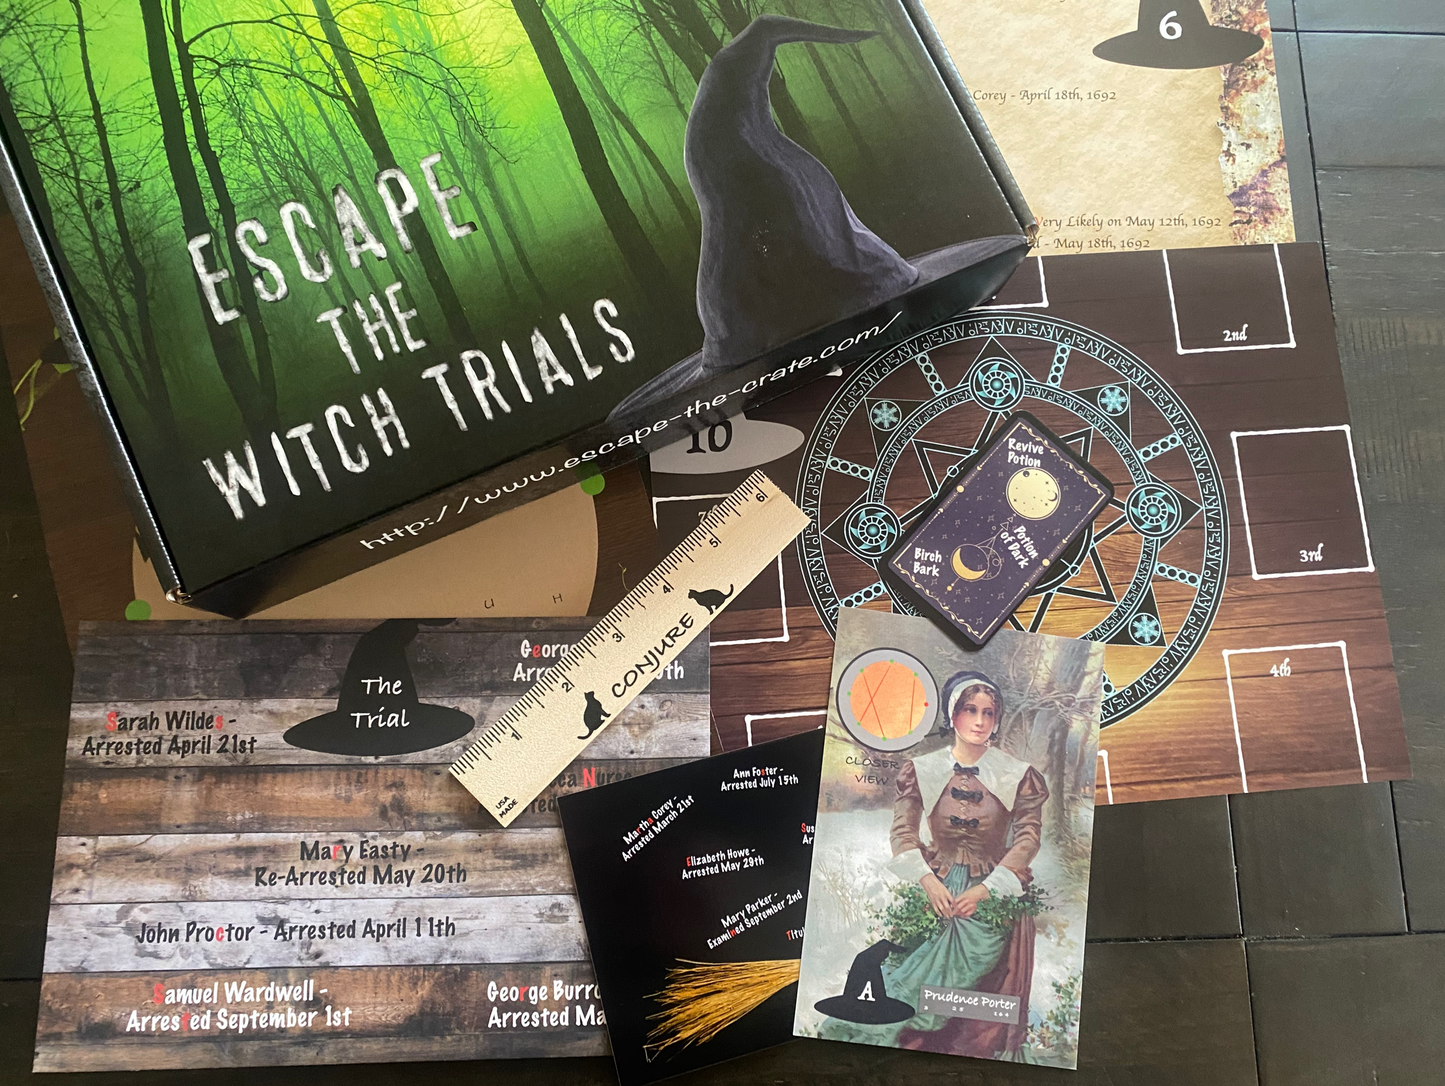 Escape the Witch Trials (One-Time Purchase)